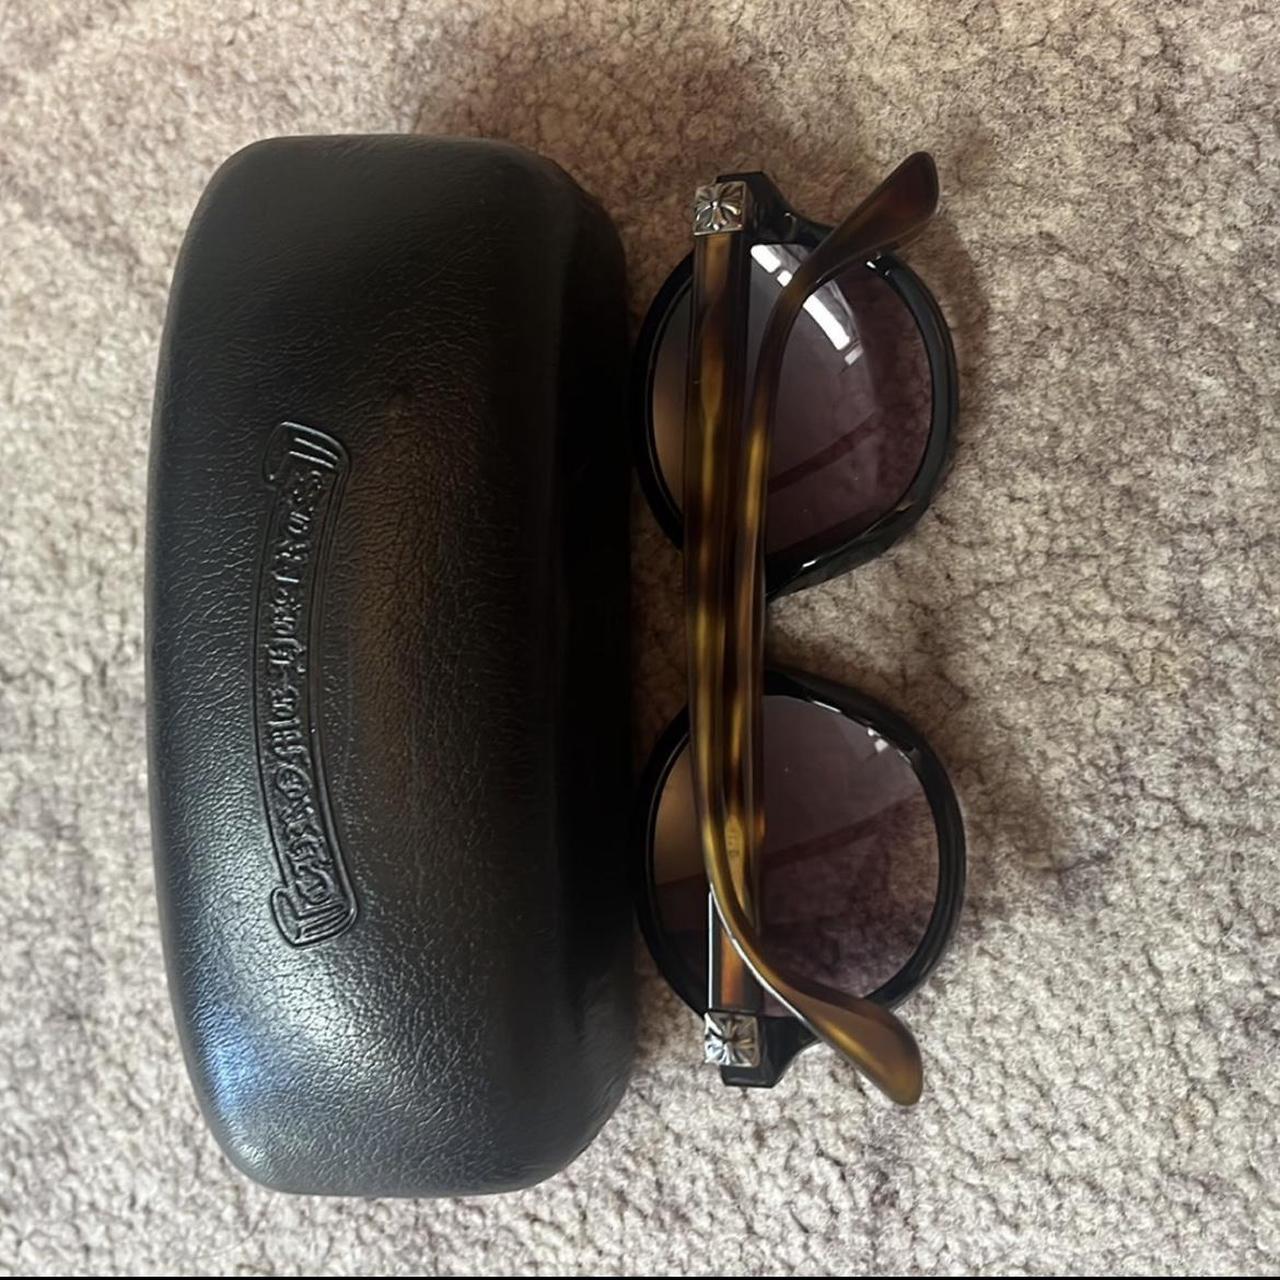 Chrome Hearts Store Leather Sunglasses Display - Depop